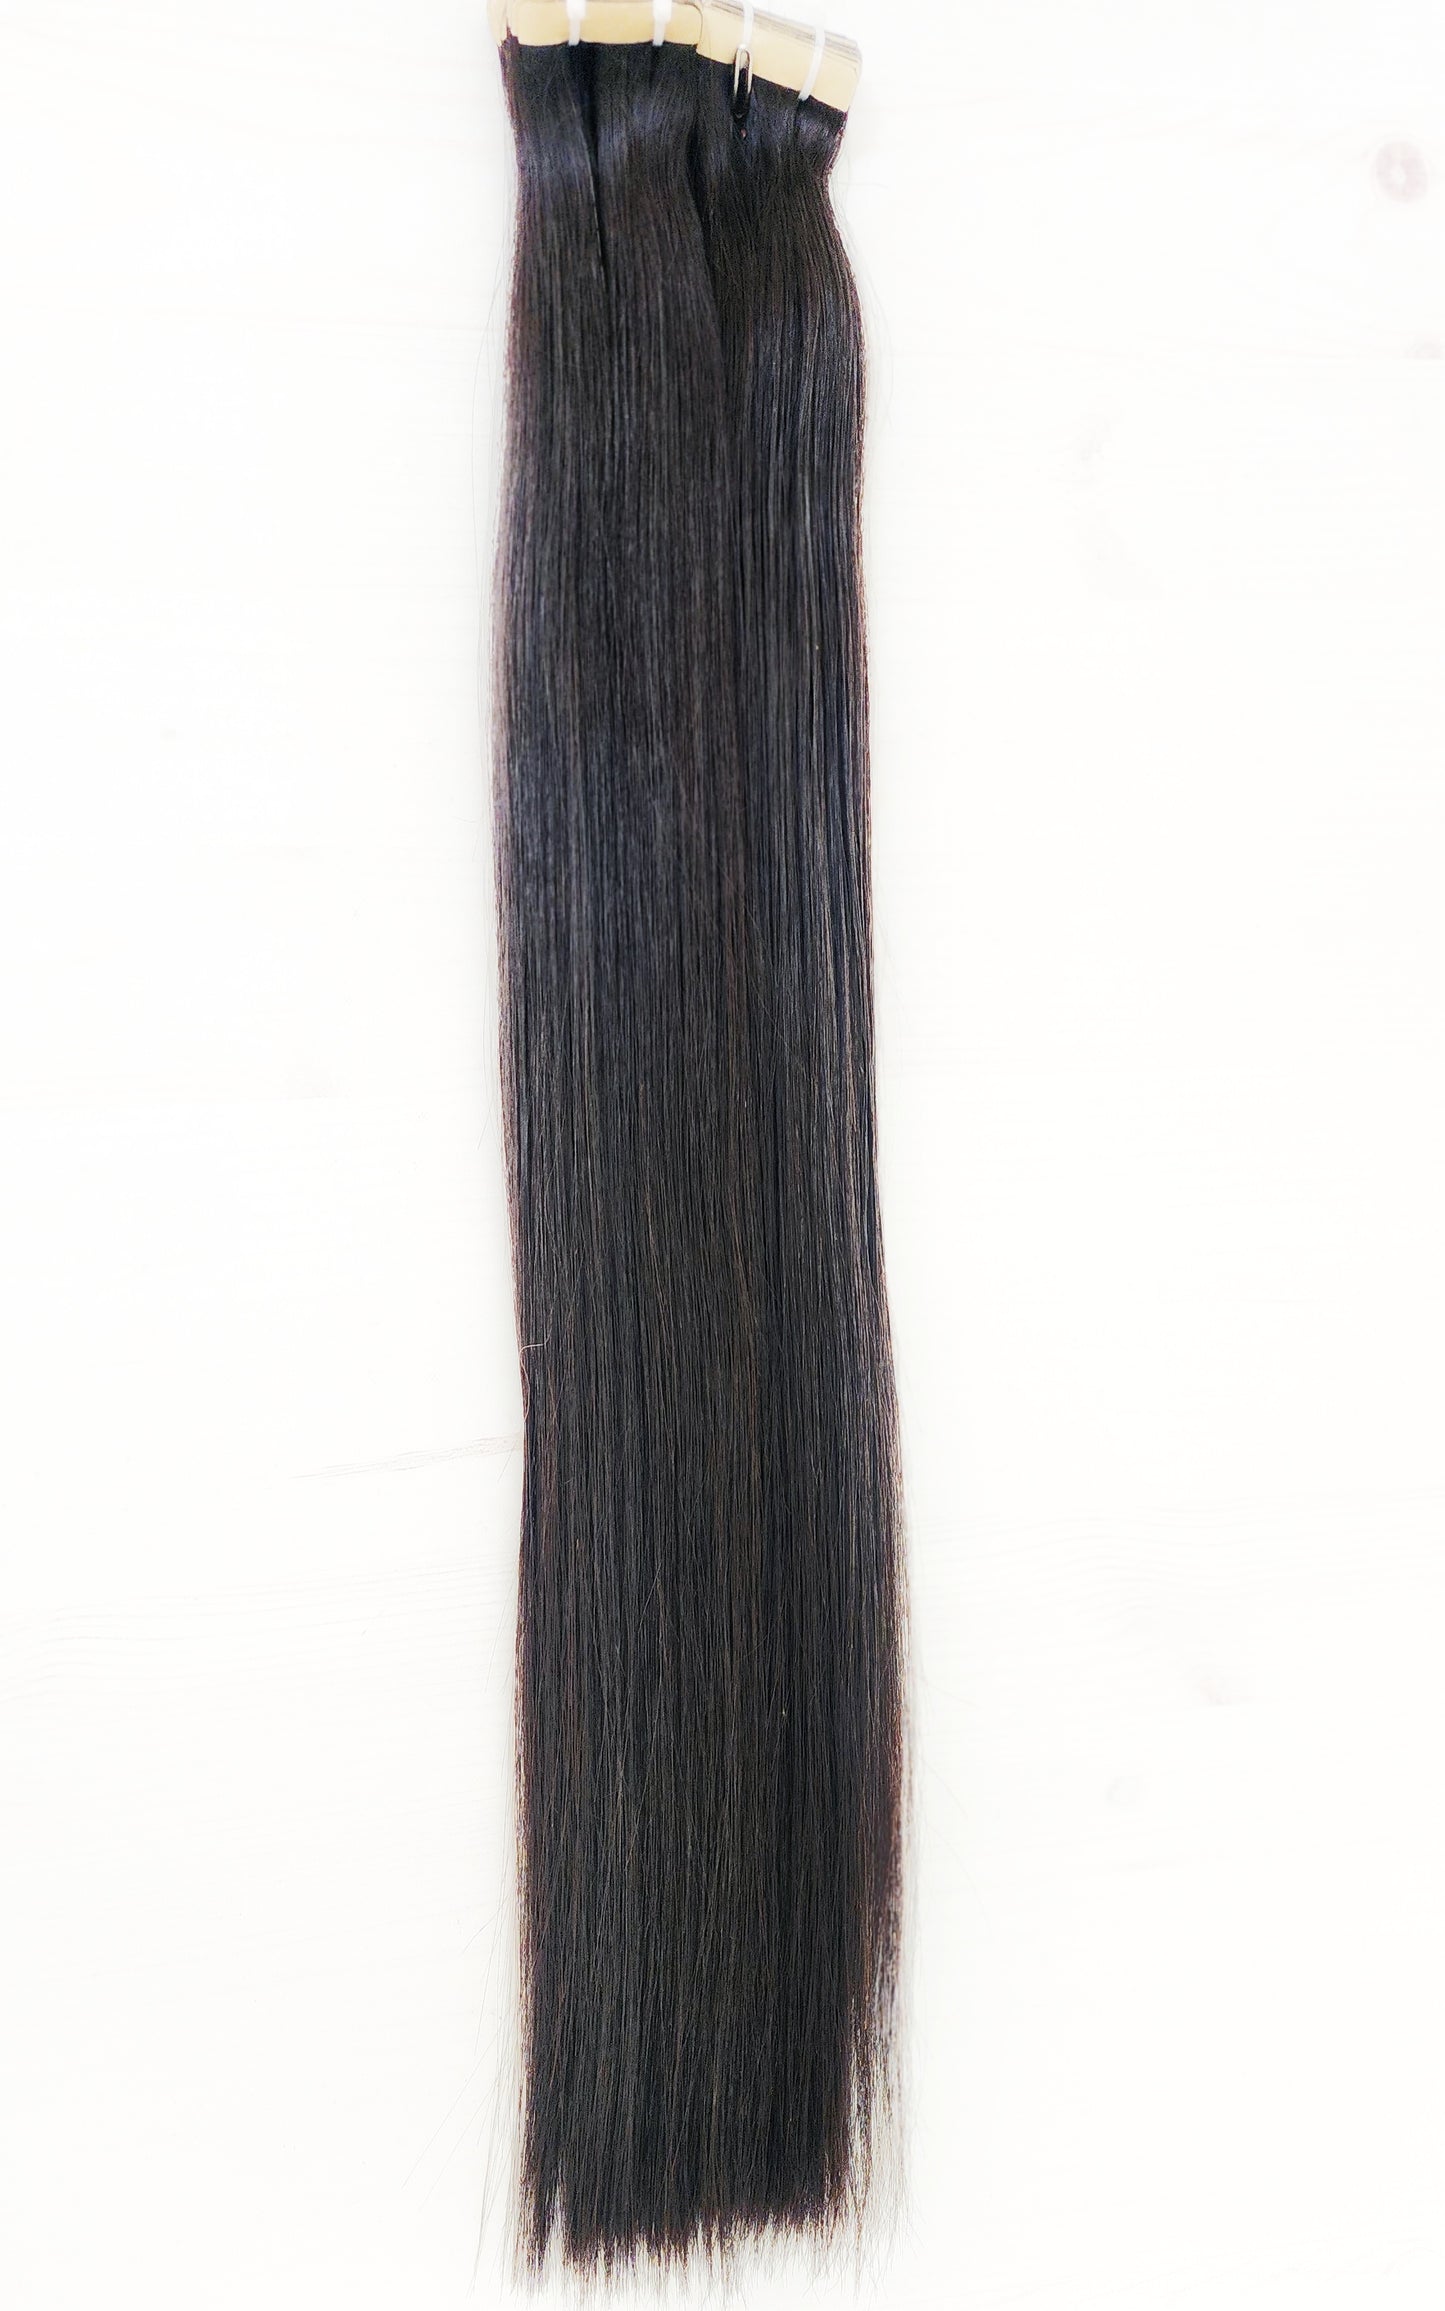 Tape In Extensions - Raw South East Asian Straight